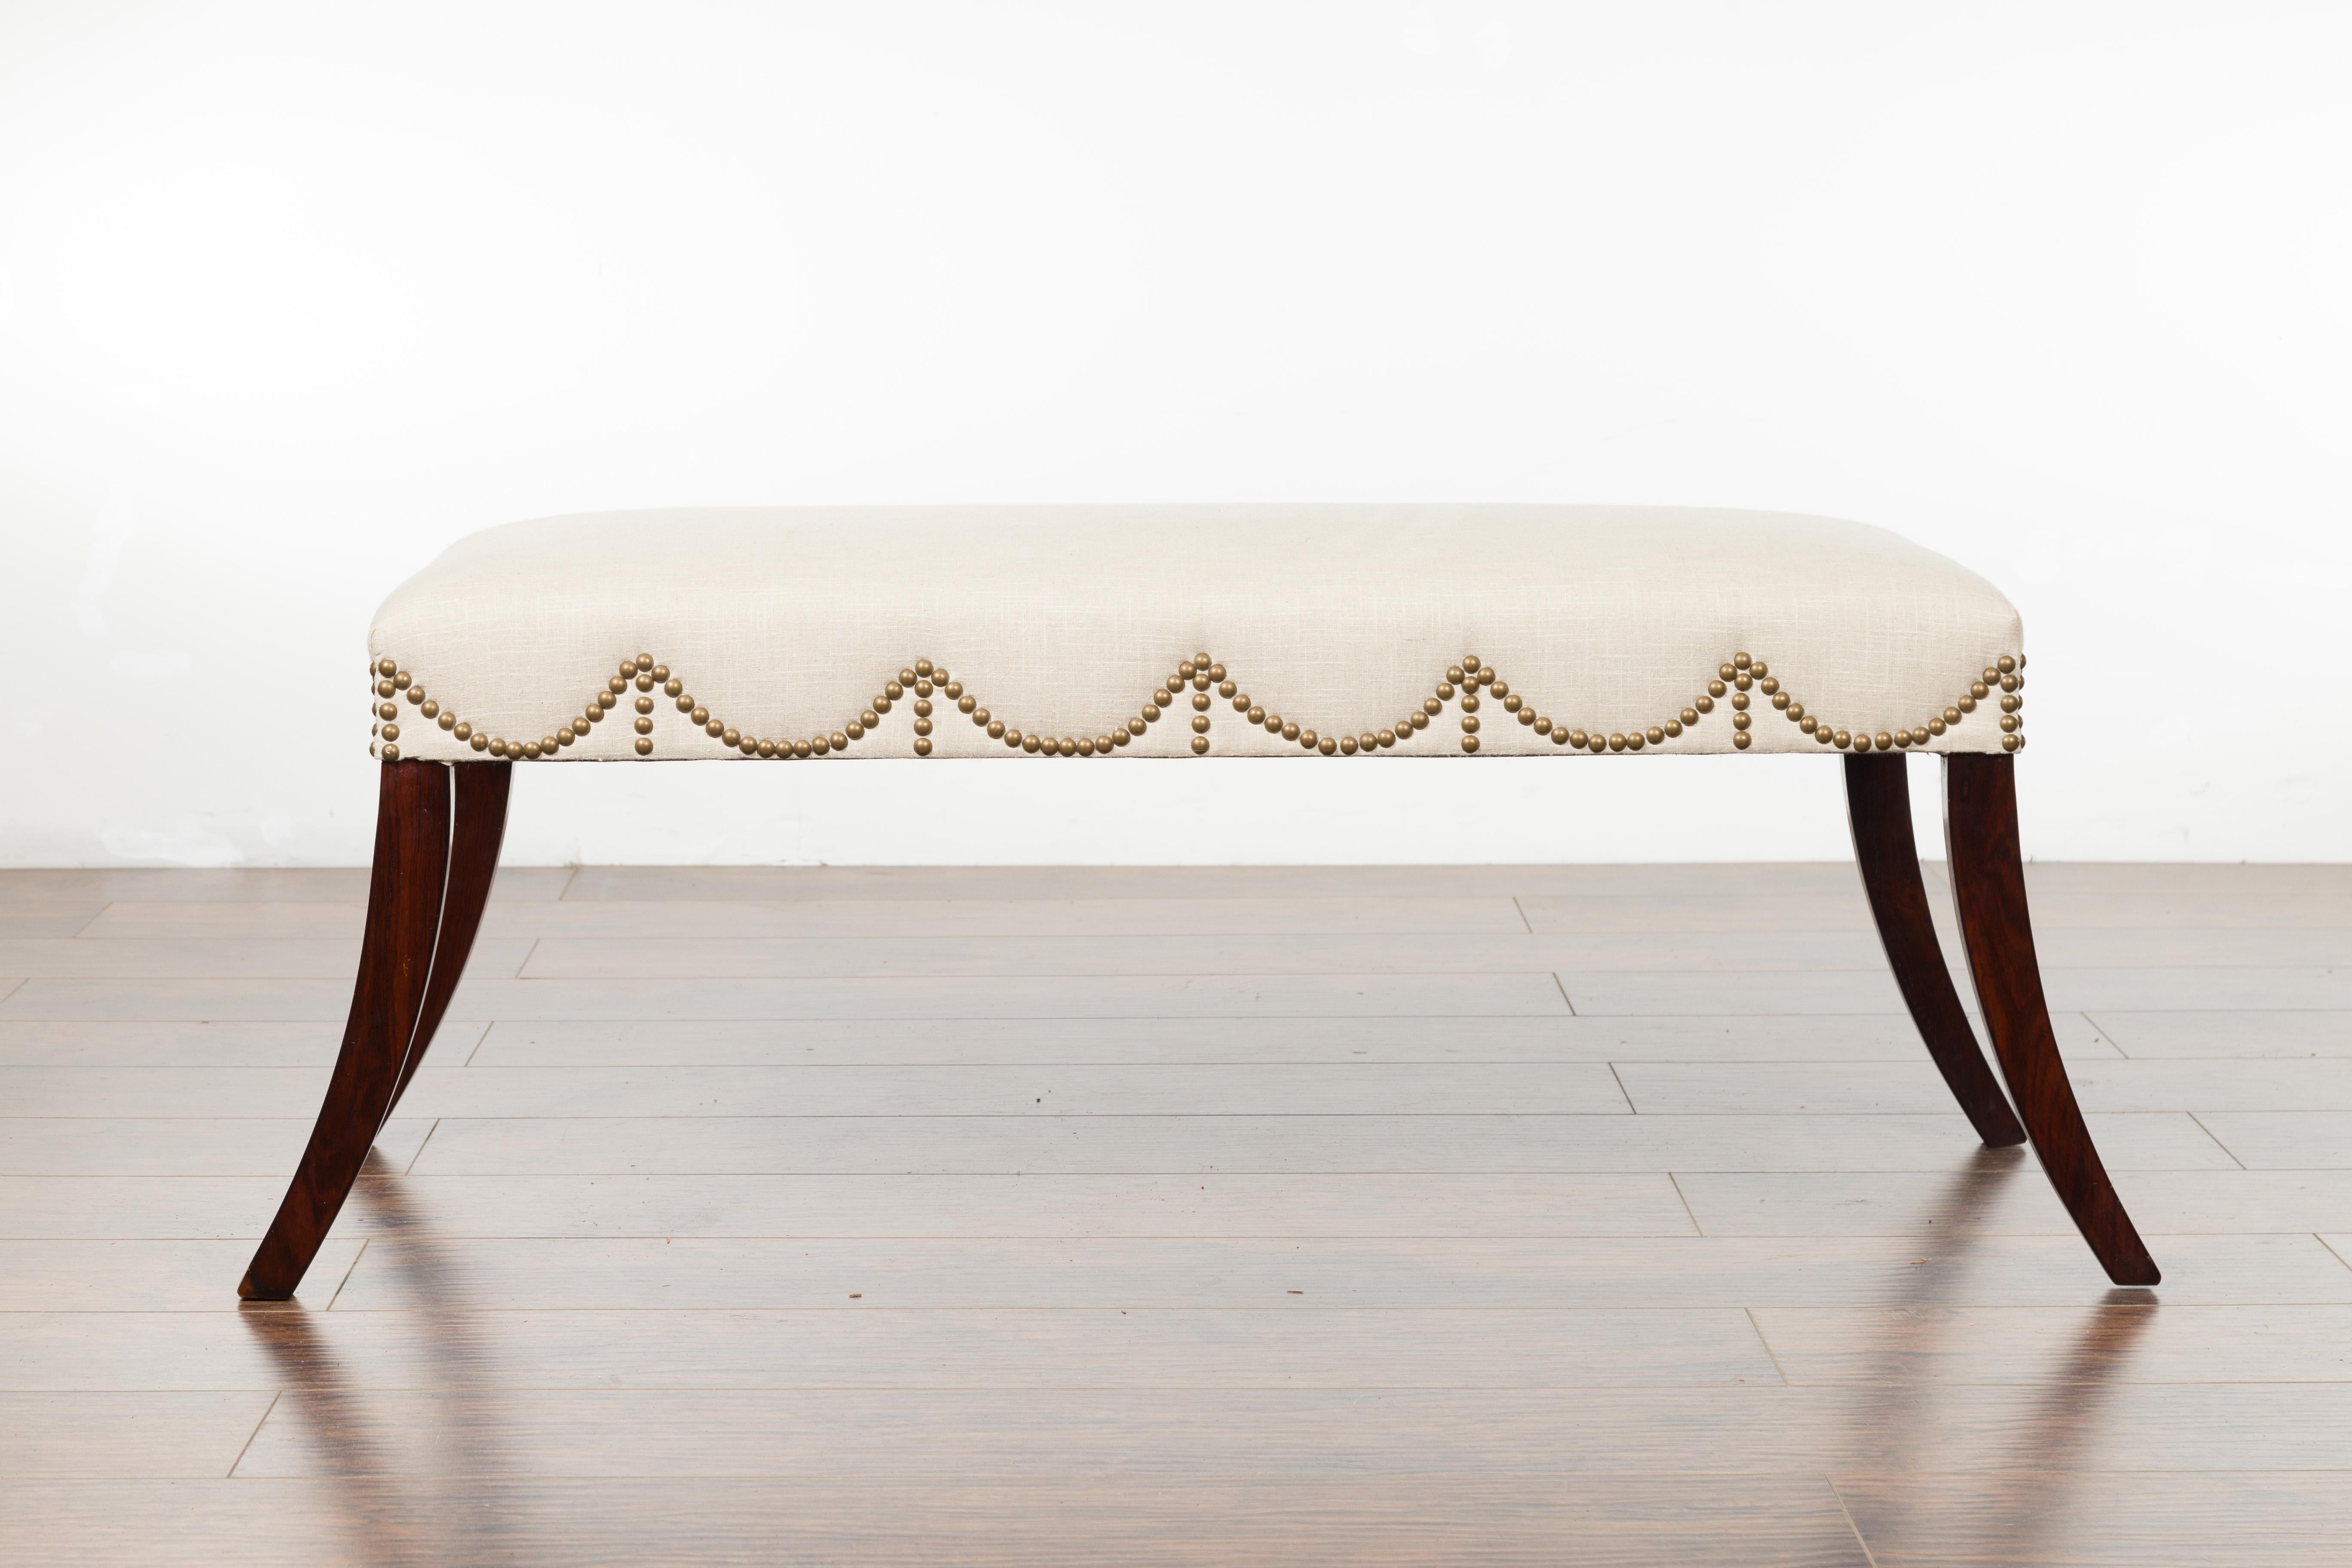 English 1820s Regency Period Wooden Bench with Saber Legs and New Upholstery For Sale 7